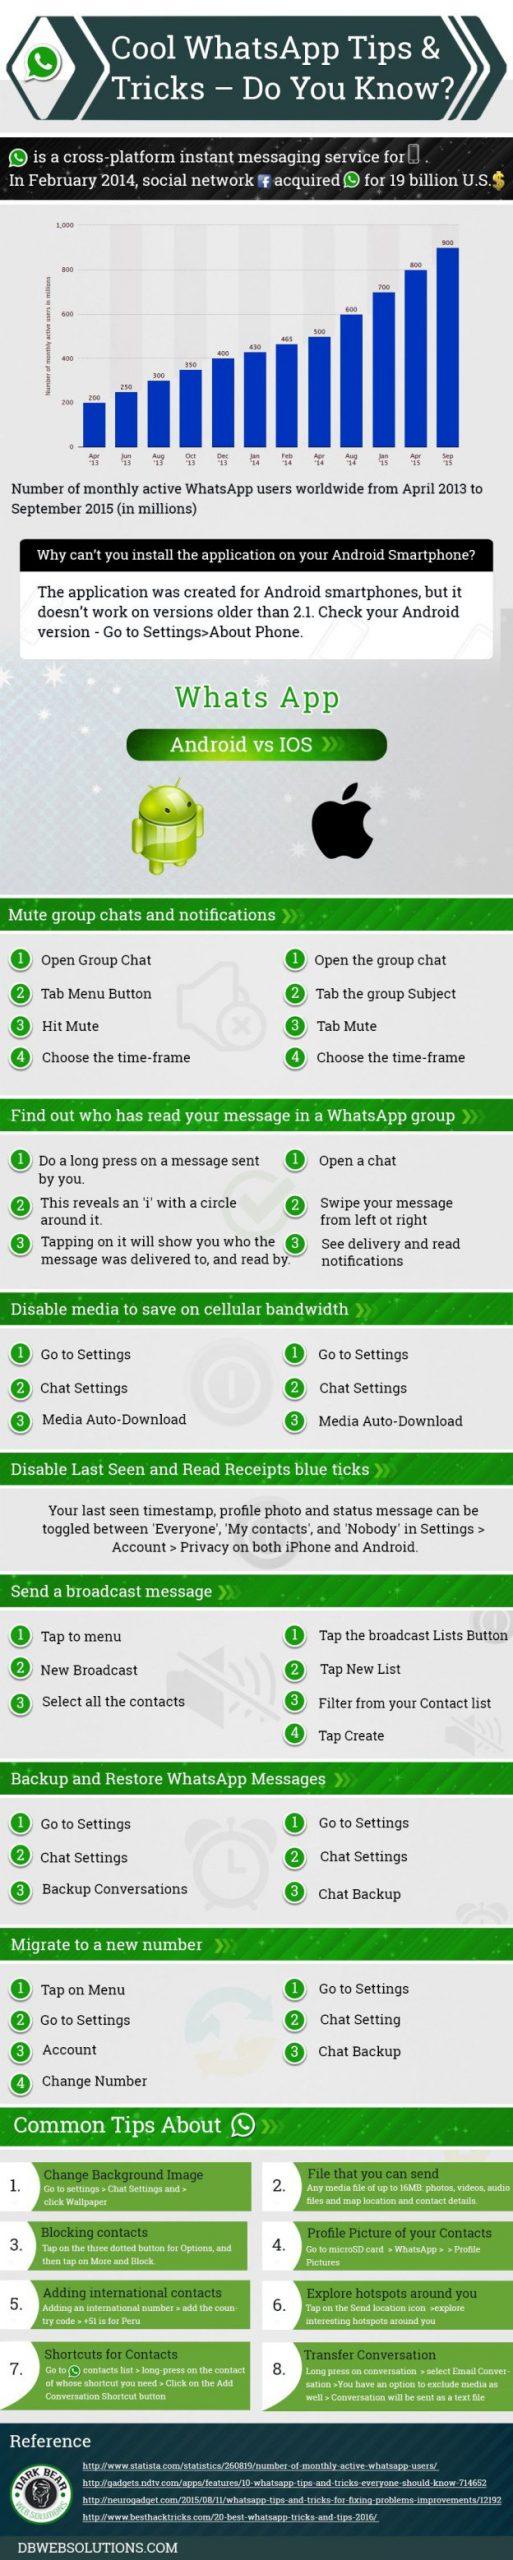 15 WhatsApp Tricks You May Not Know About